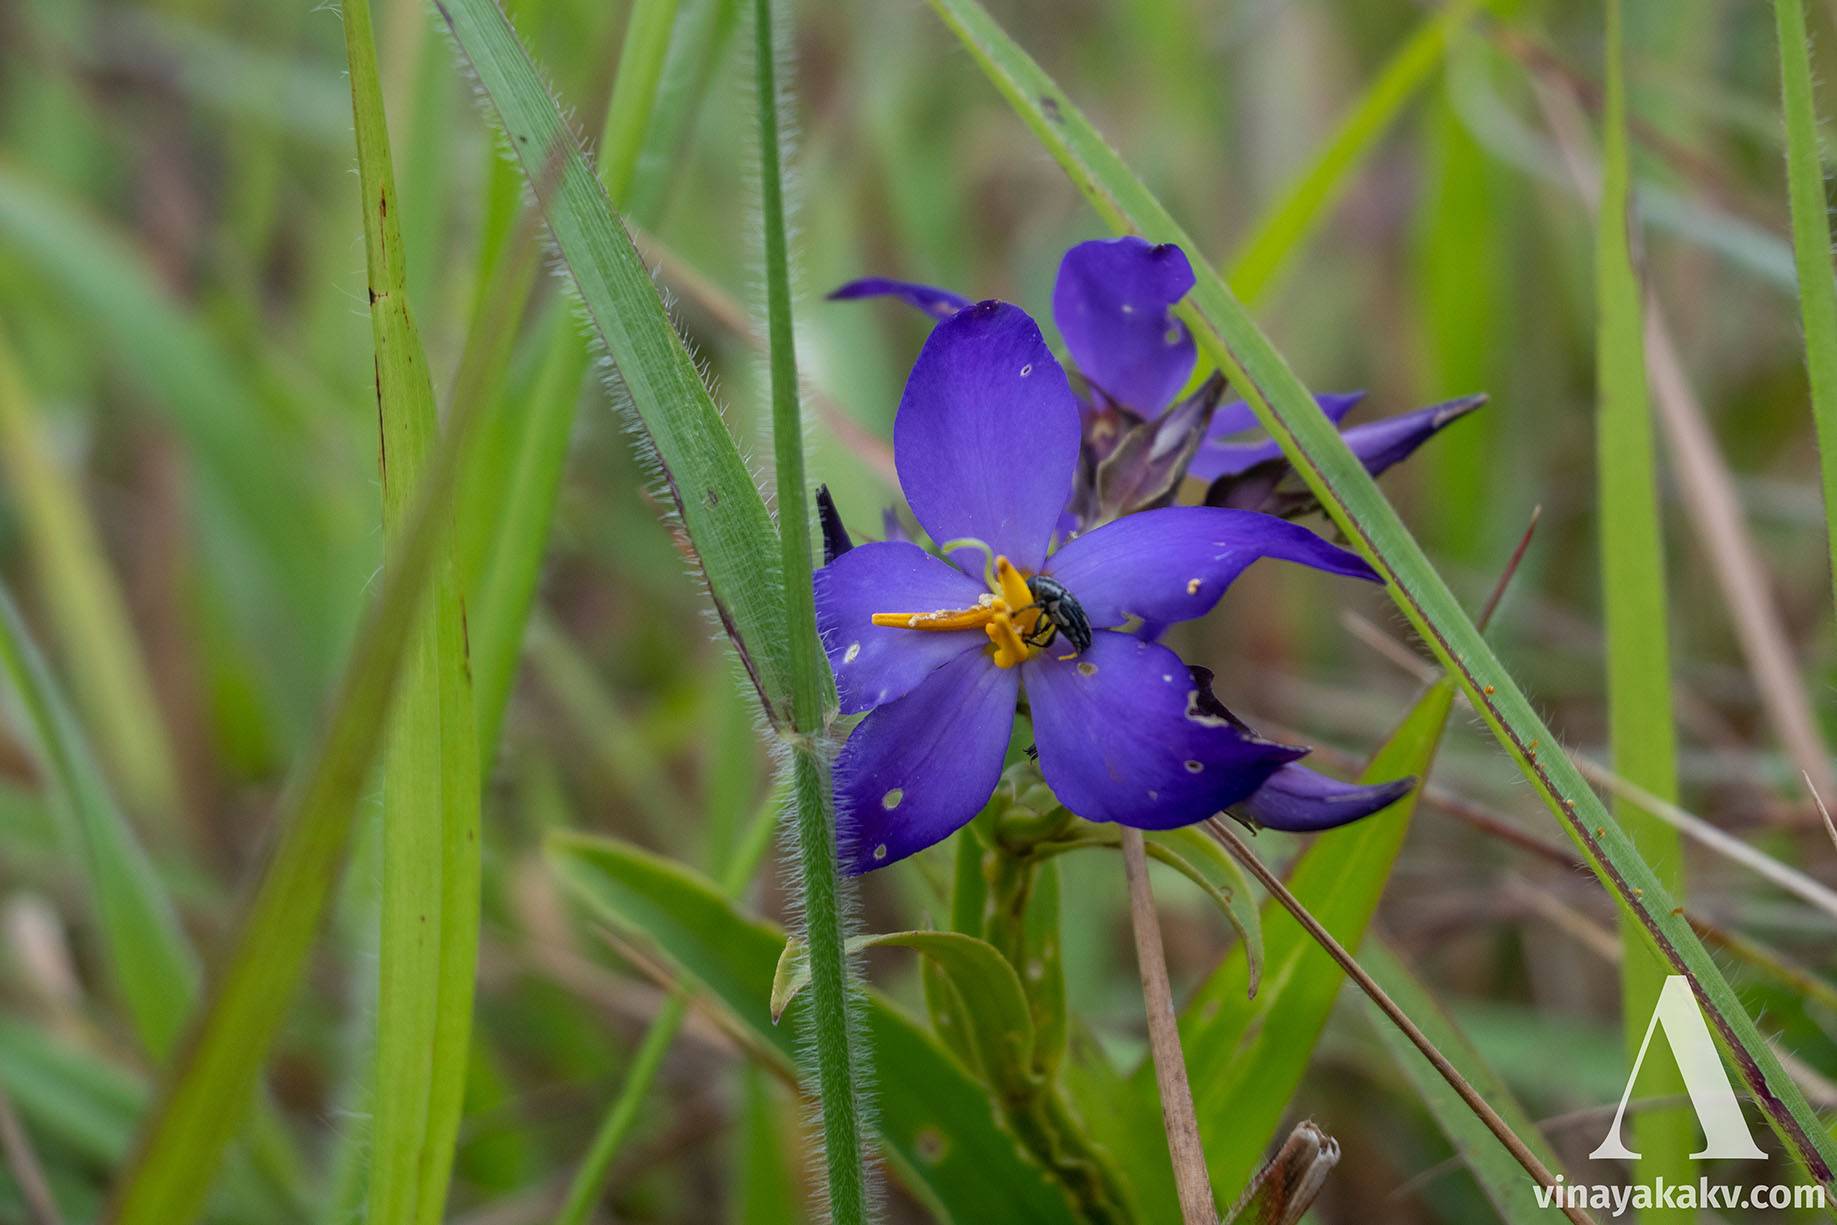 An attractive blue flower with its pollinator